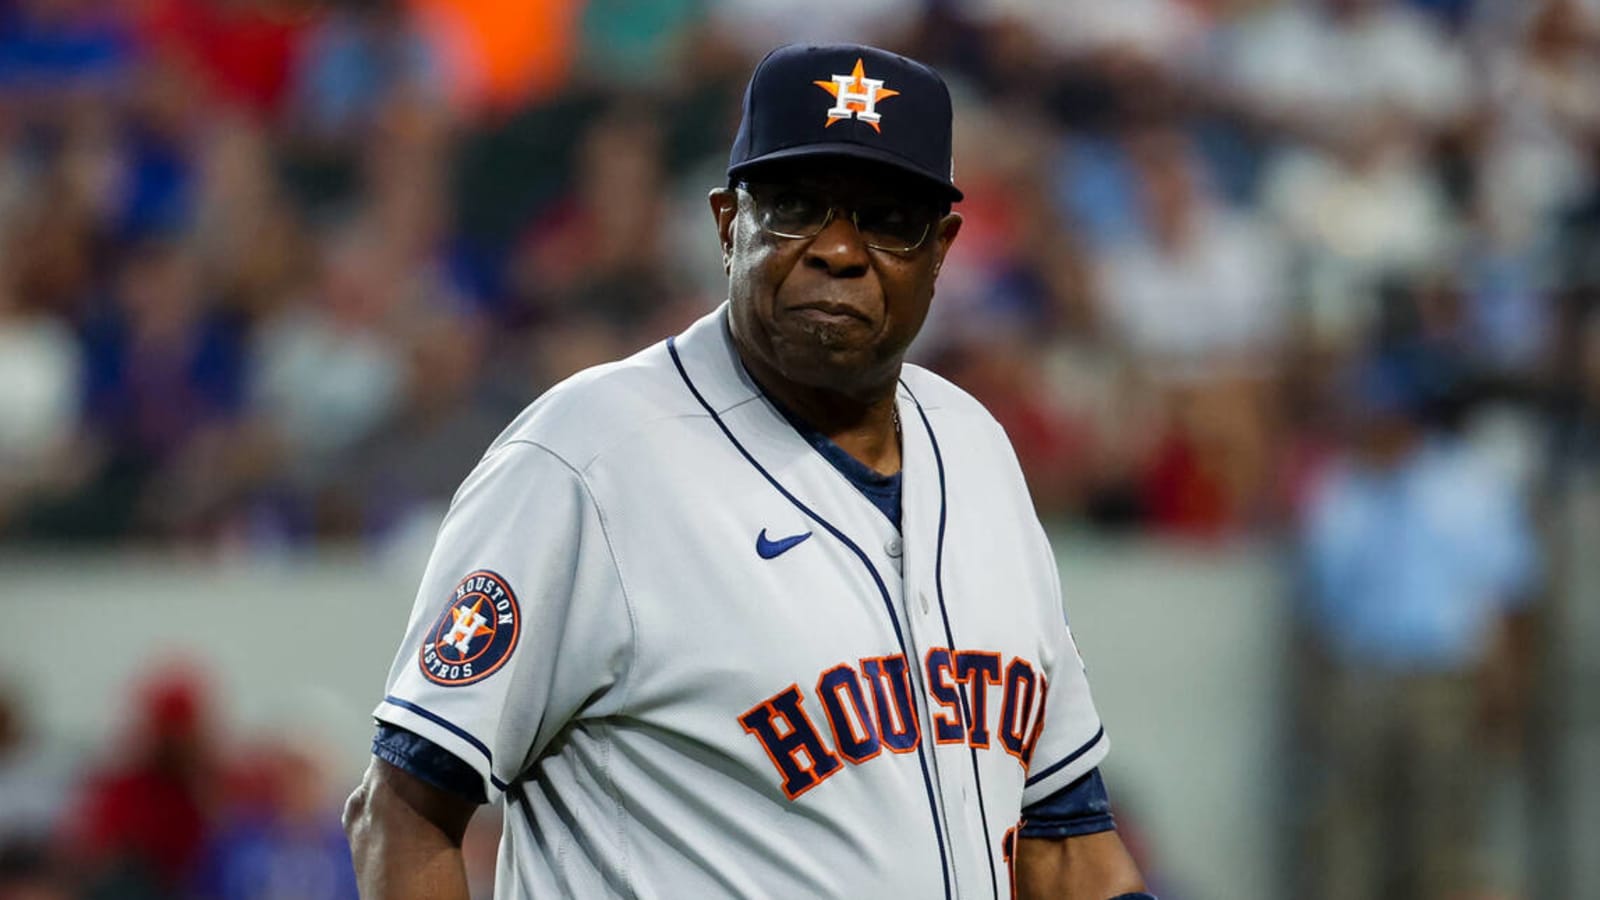 Dusty Baker responds to concerning rumor about Astros CF